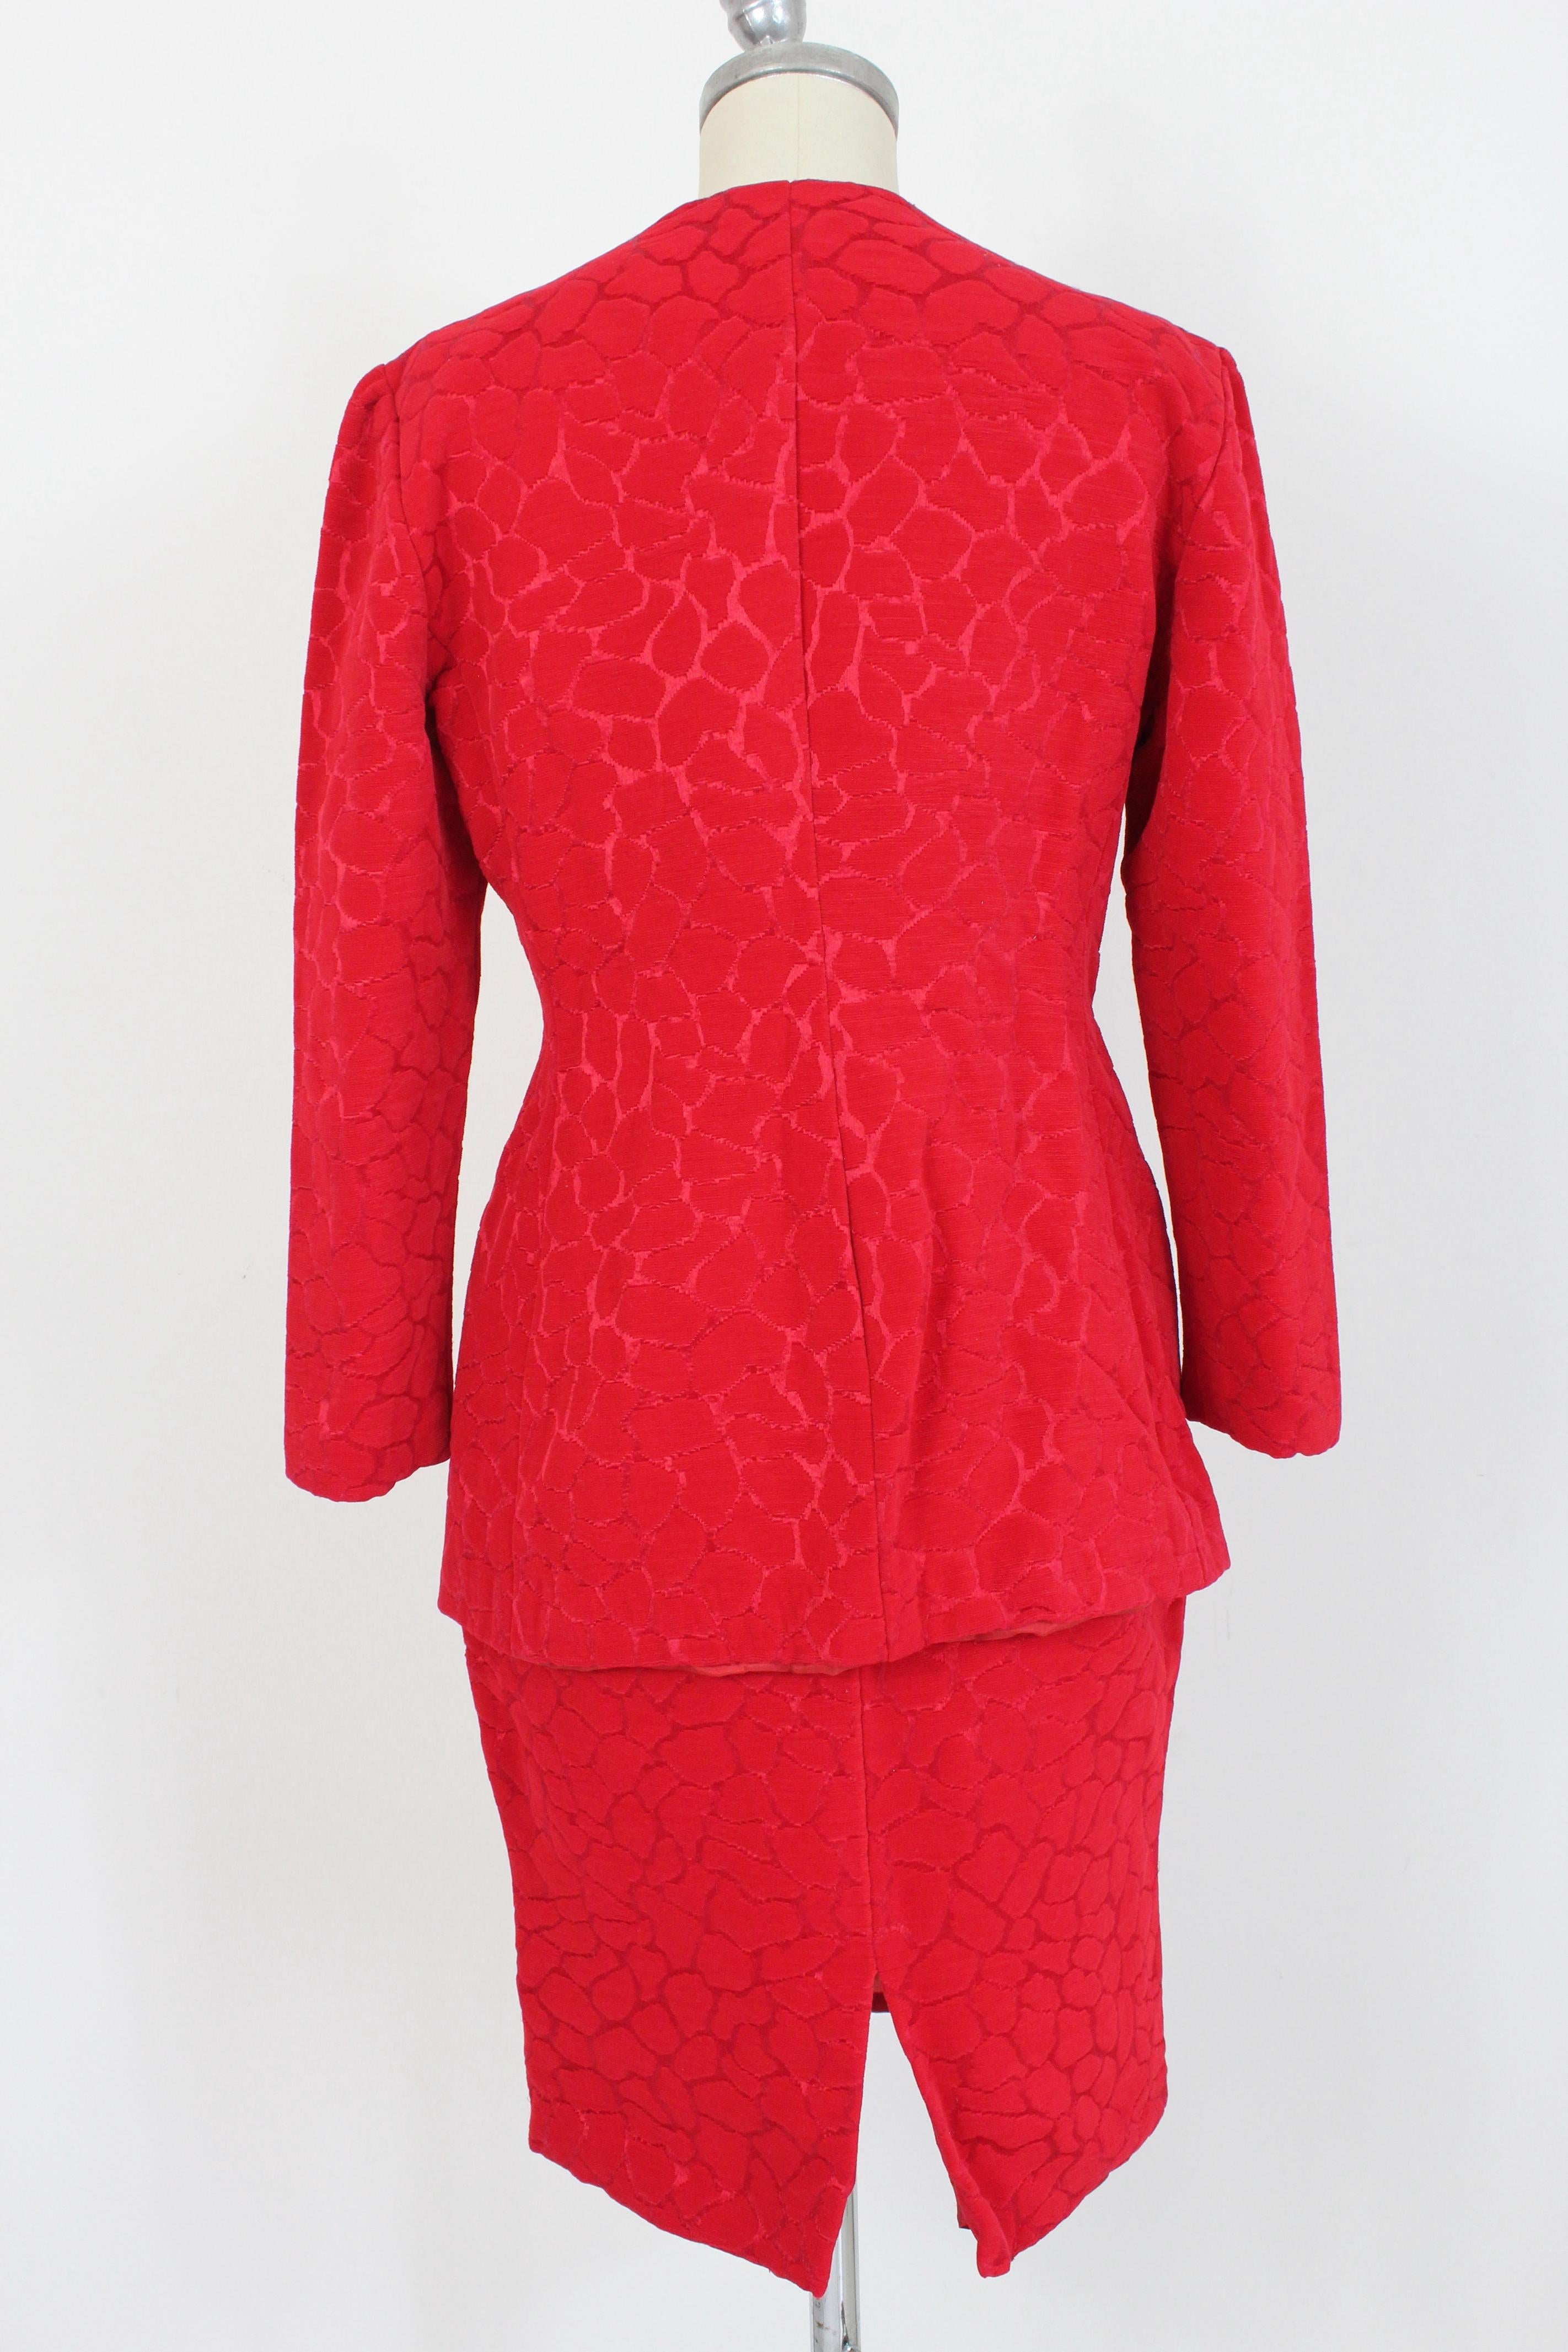 Gai Mattiolo Couture 90s vintage women's suit. Suit skirt, red with tone-on-tone damask pattern. Fabric 78% polyamide 22% silk, internally lined. Made in Italy.

Condition: Excellent

Item used few times, it remains in its excellent condition. There